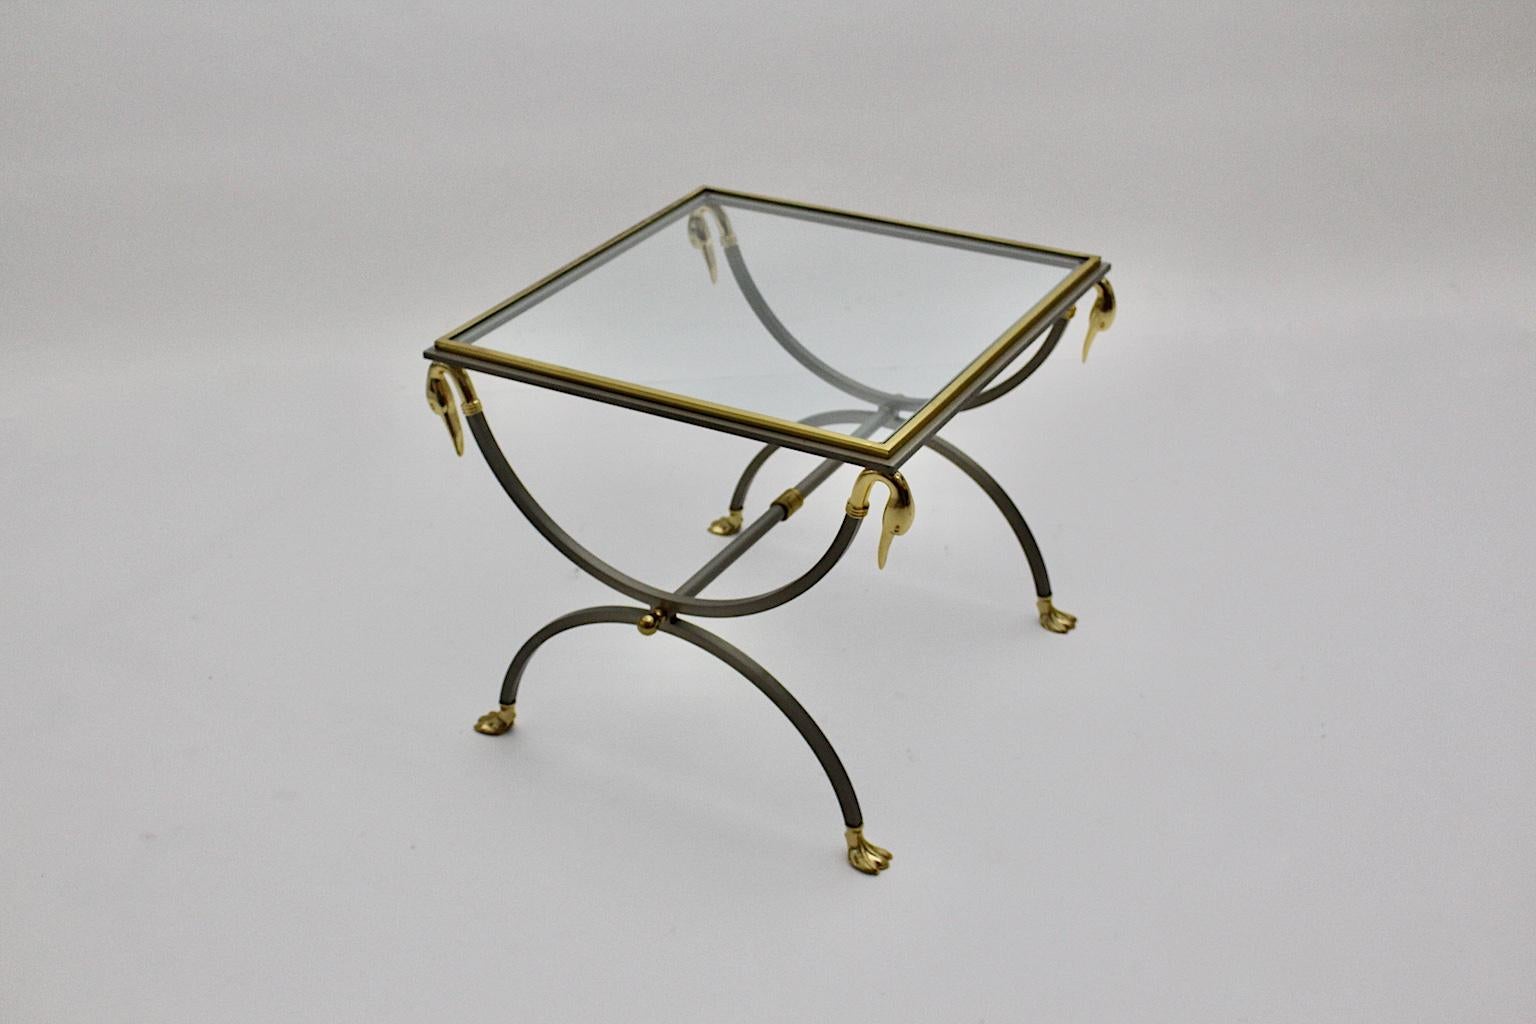 French Maison Jansen Vintage Gold Stainless Steel Coffee Table circa 1970 France For Sale